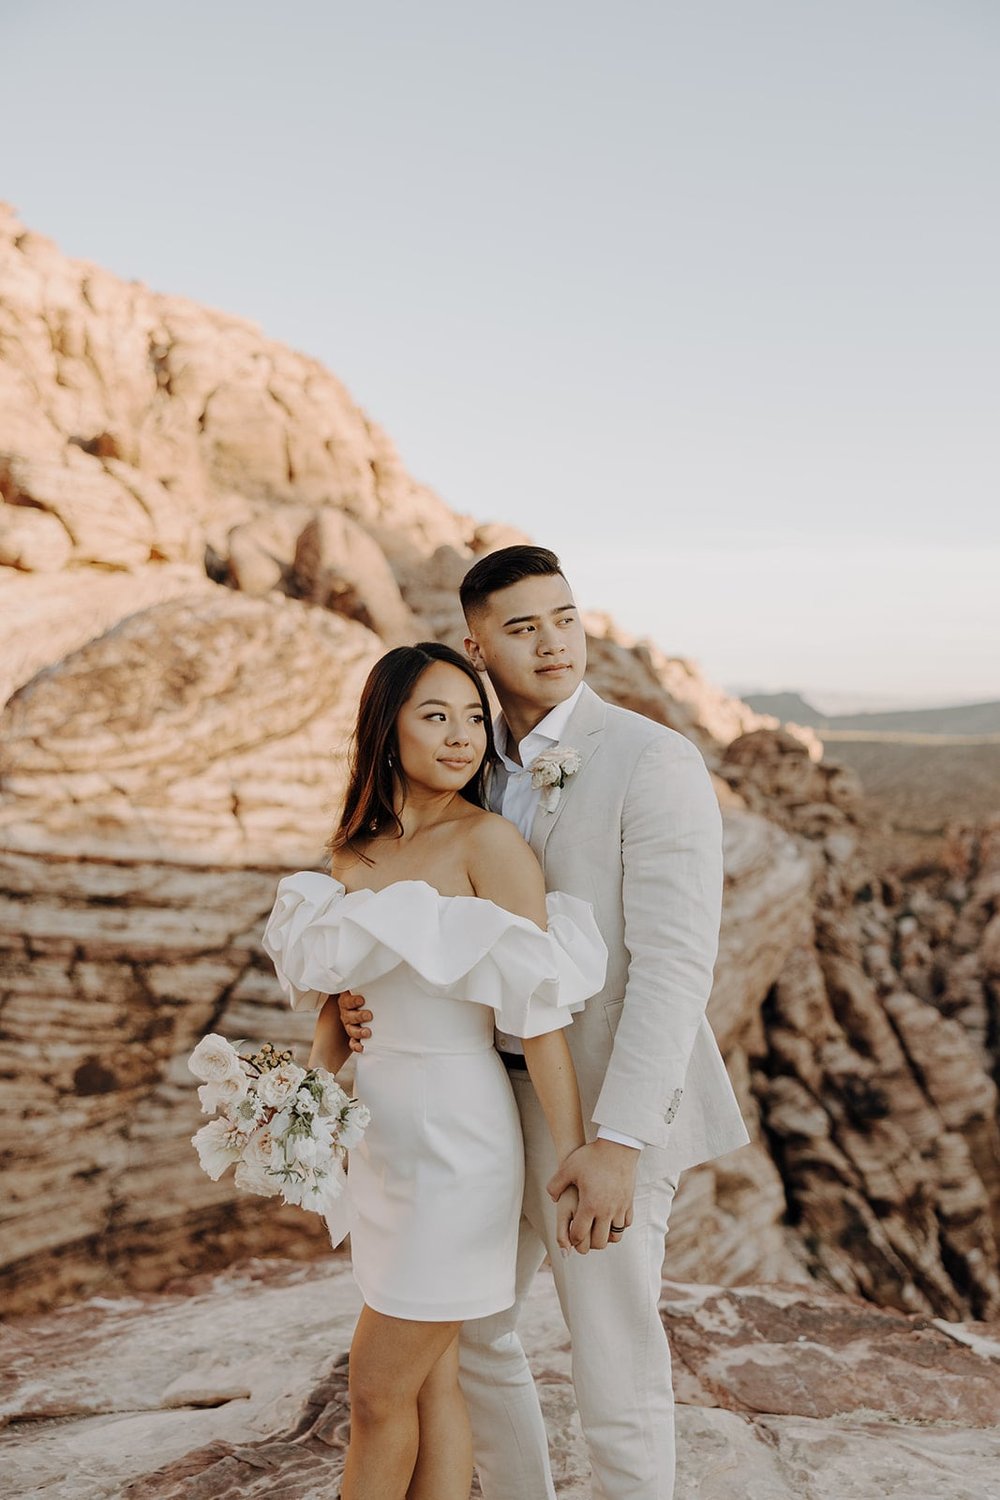 Bride and groom elopement photos at Red Rock Canyon